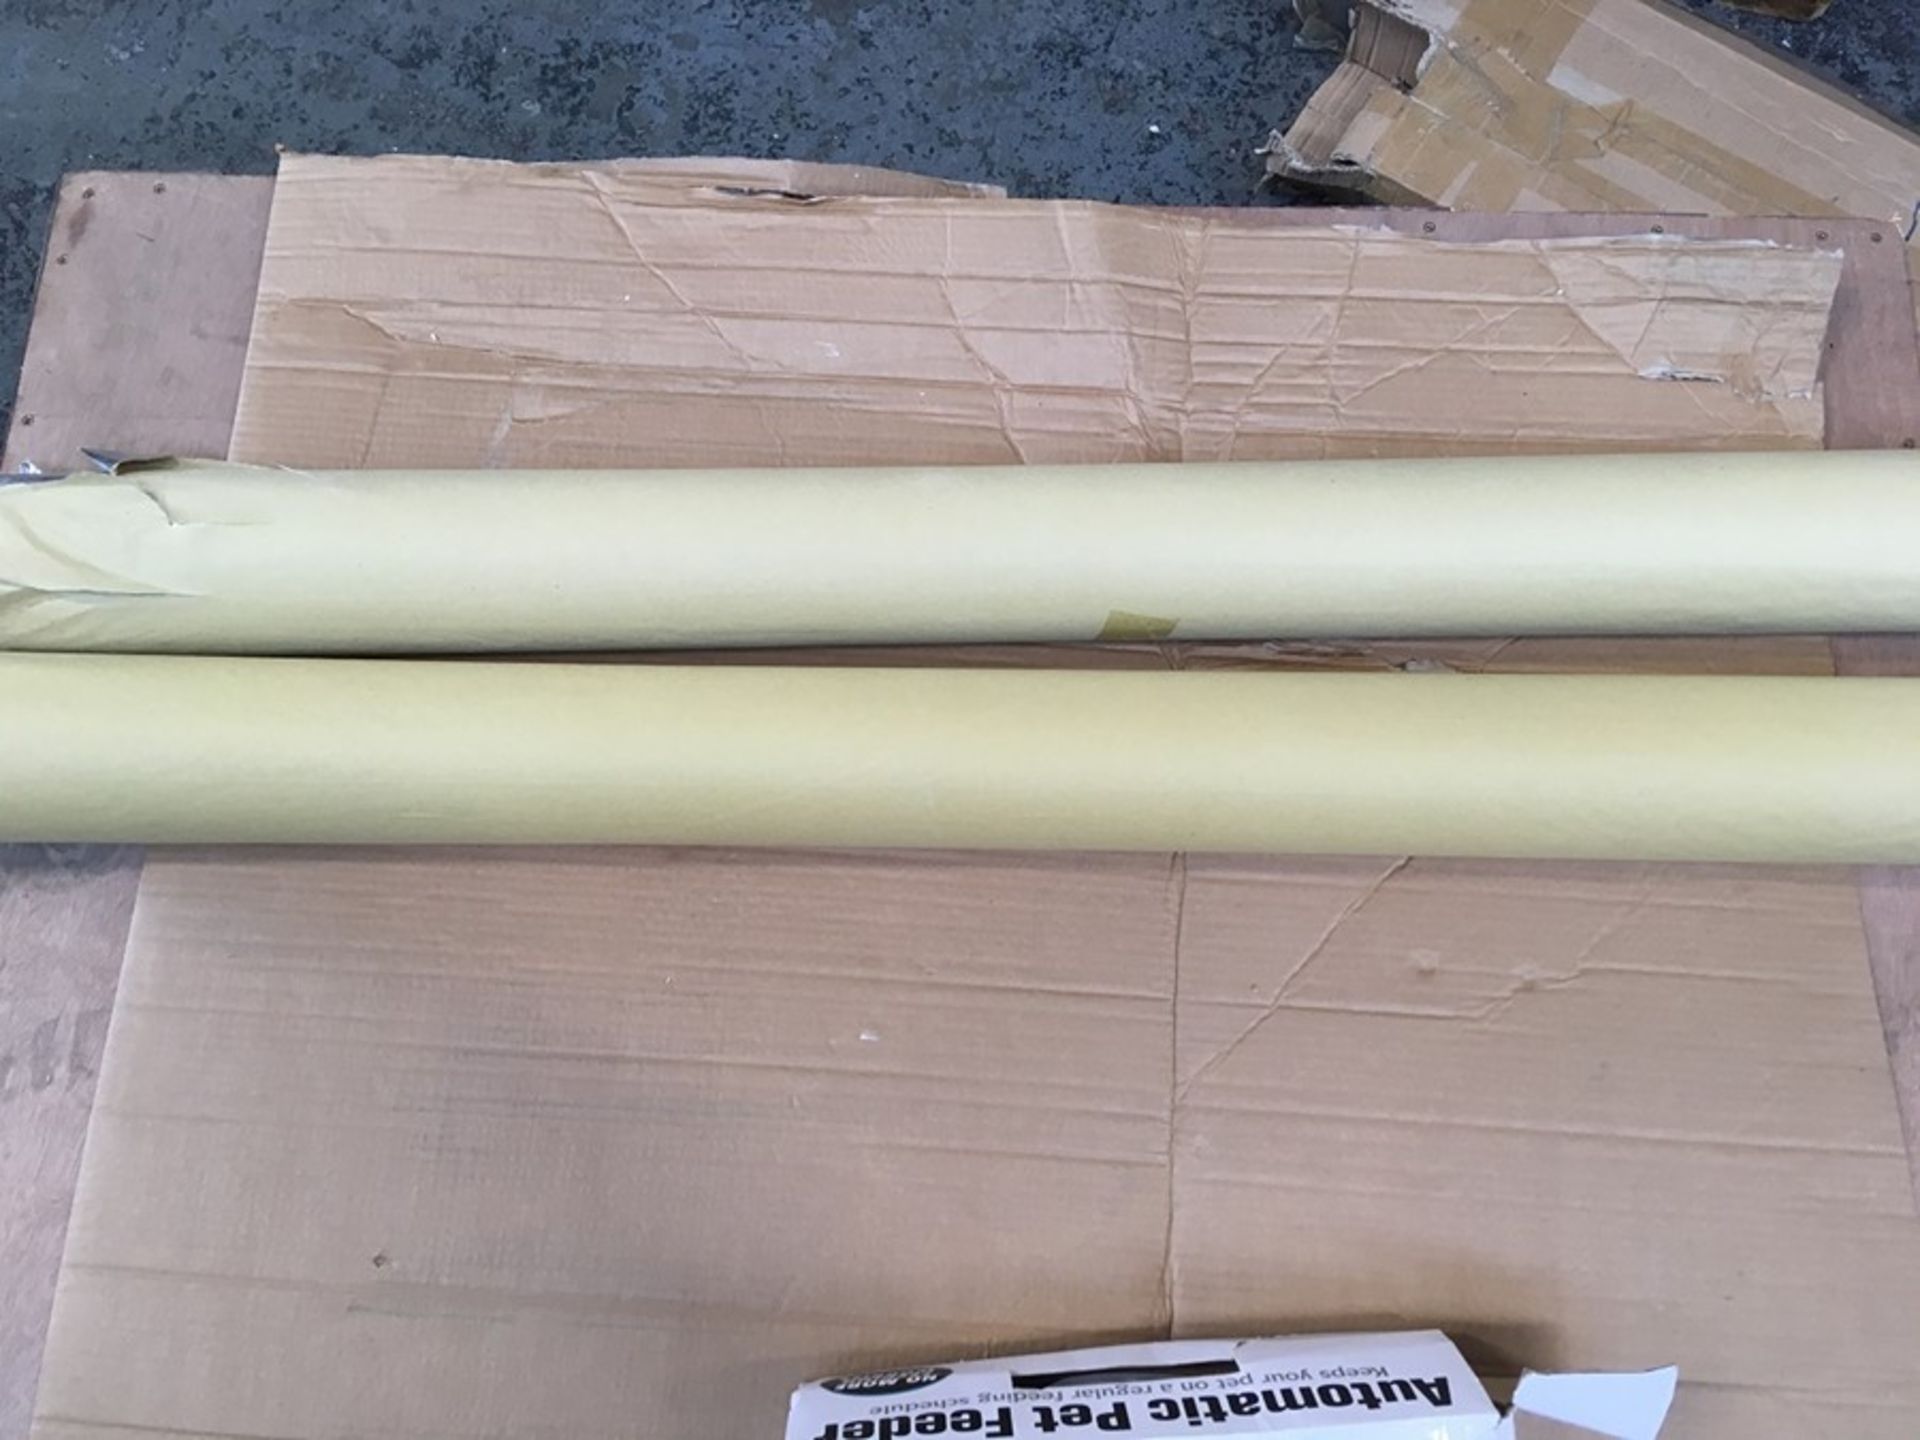 1 BOX CONTAINING 2 LARGE ROLLS OF WOVEN ALUMINIUM FOIL / WIDTH OF ROLL IS 1.2M (PUBLIC VIEWING